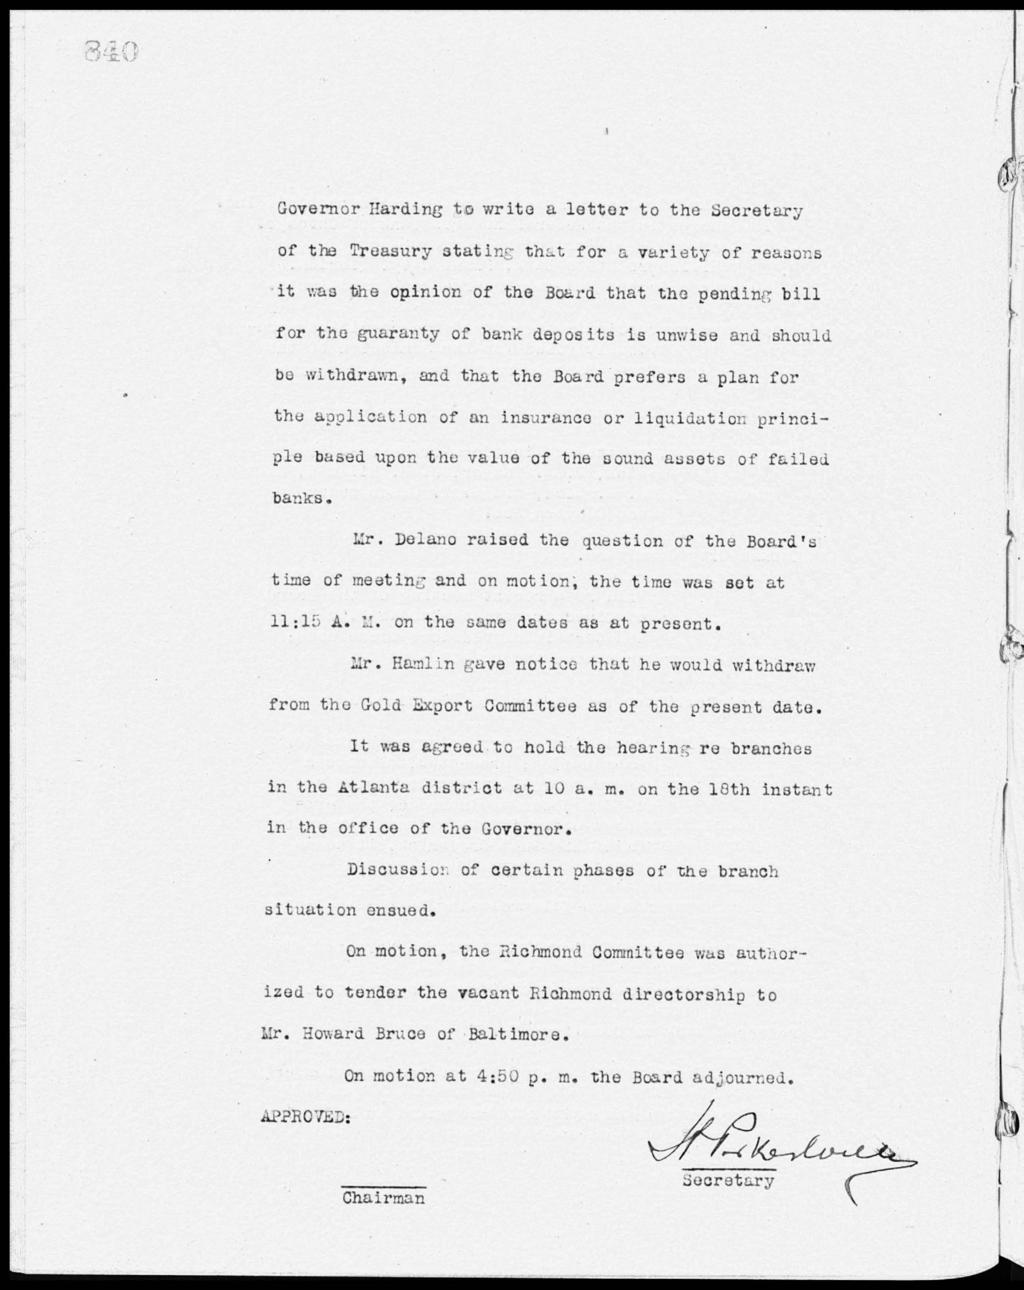 p kj! Governor Harding to write a letter to the Secretary 61,3 of the Treasury etatin that for a variety of reasons it was the opinion of the Board that the pending bill for the guaranty of bank